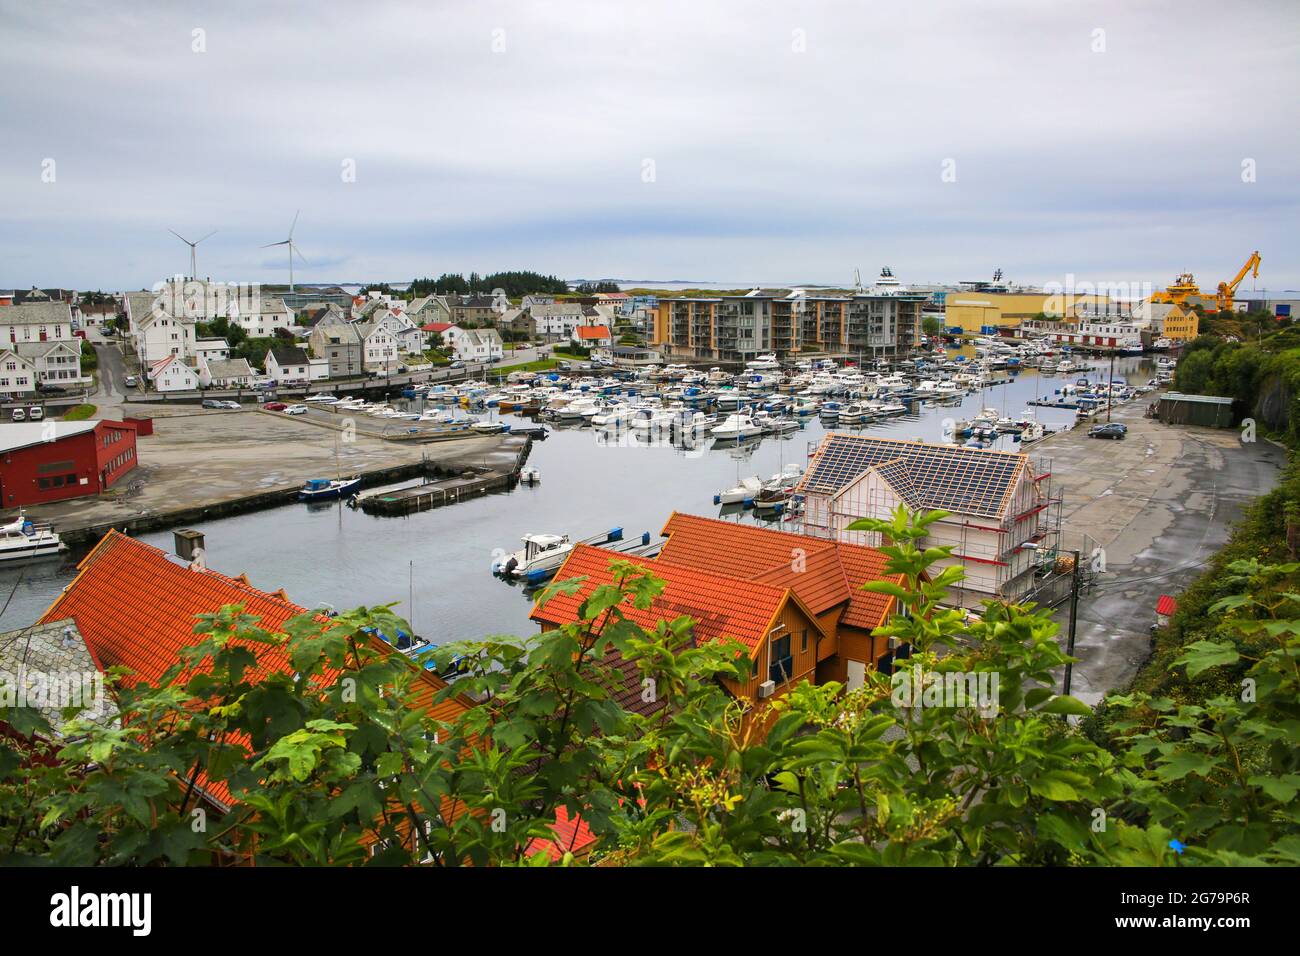 Smedasundet area and river in the center of the town. Surrounded by traditional buildings and boats in the water, Haugesund, Norway. Stock Photo